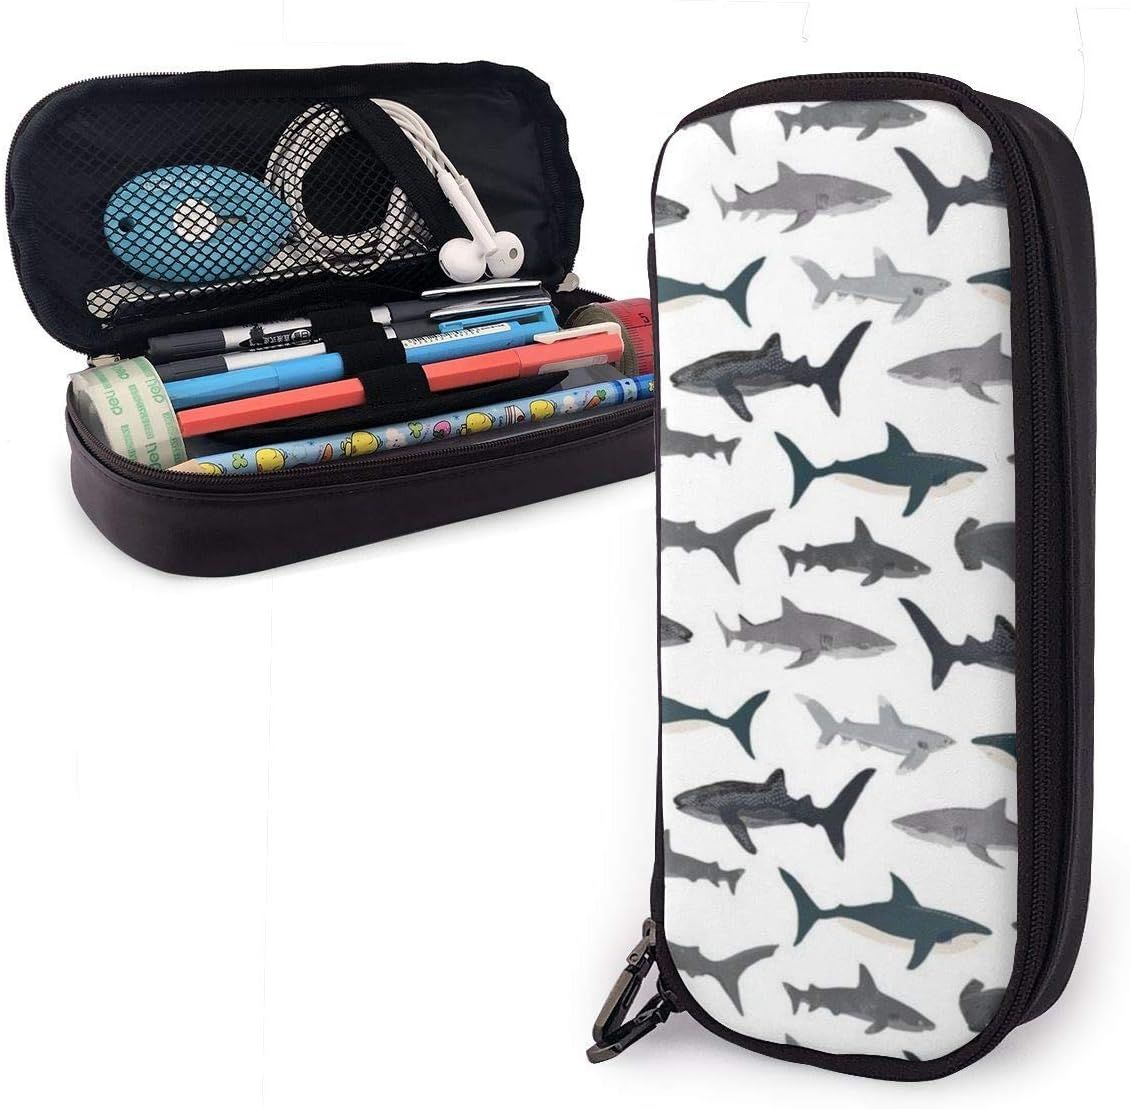 Trousse ¿¿ Crayons Requin Silhouette Grand Stylo Sac Pochette ¿¿ Crayons ¿¿Tanche Grande Capacit¿¿ Sac ¿¿ Crayons Pour Les Filles